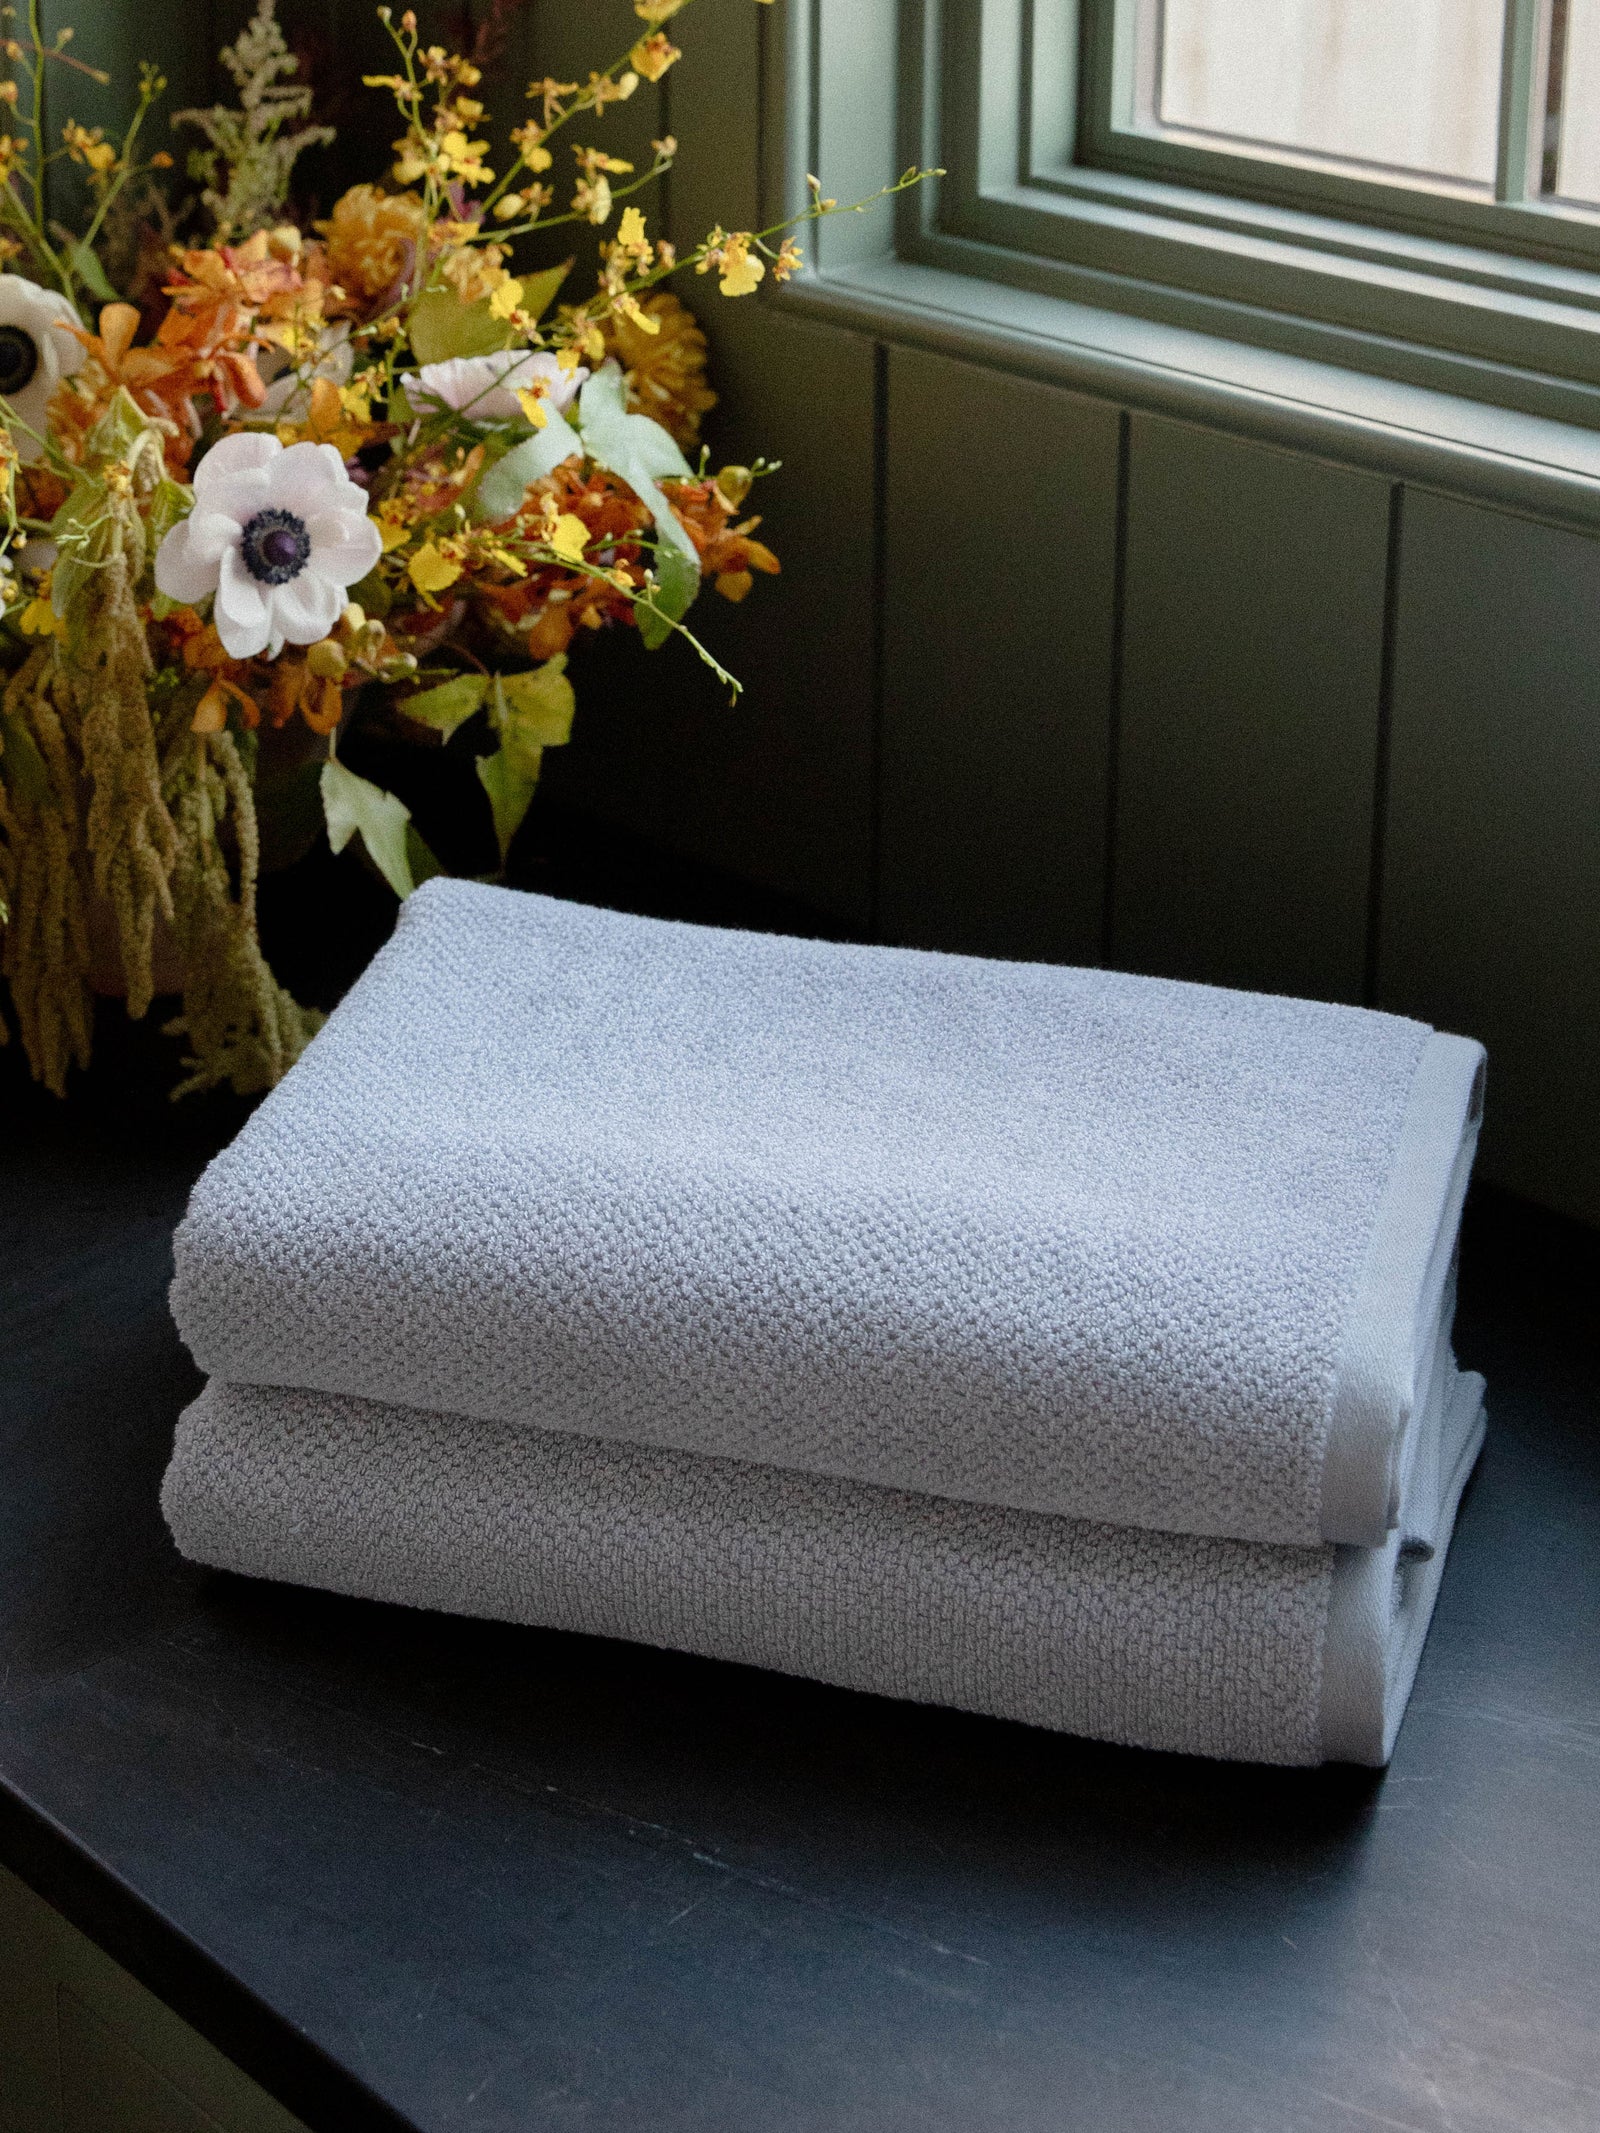 Nantucket Bath Towels in the color Heathered Harbor Mist. Photo of Nantucket Bath Towels taken with the bath towels resting on a countertop in a bathroom. 